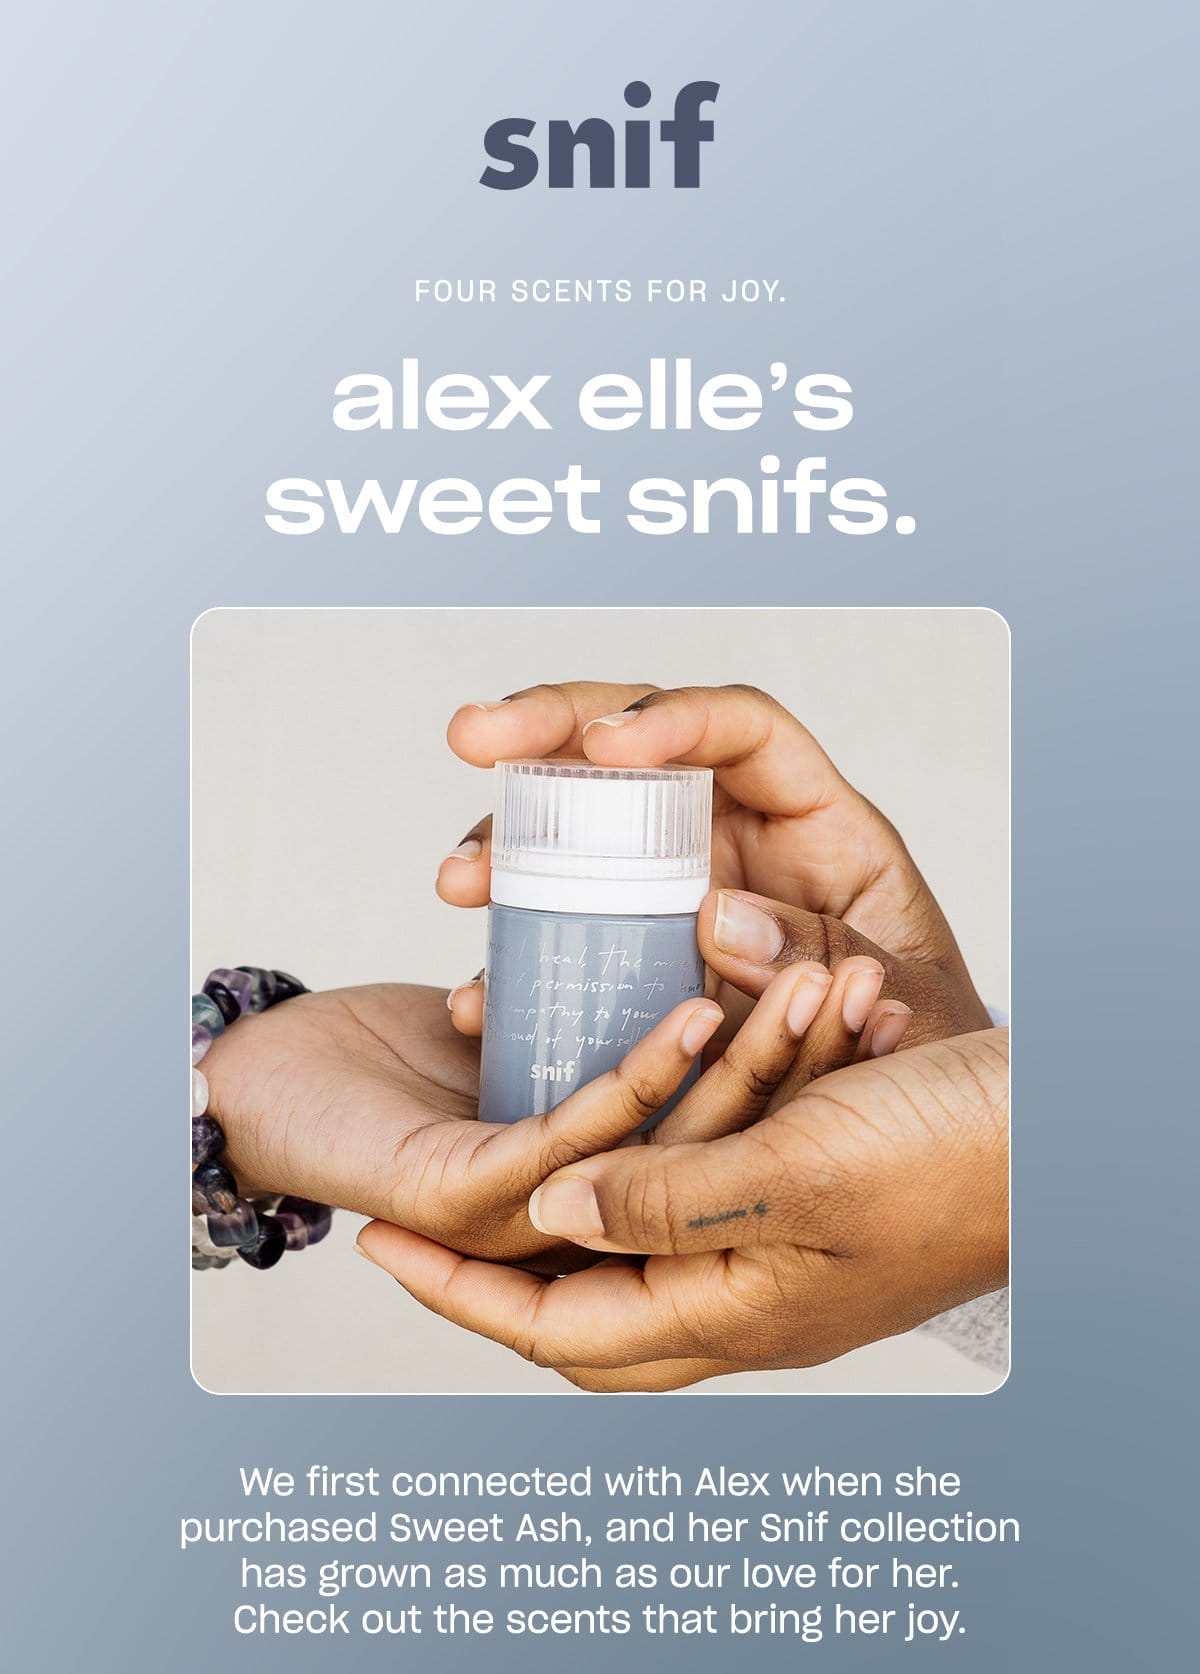 snif FOUR SCENTS FOR JOY. alex elle's sweet snifs. We first connected with Alex when she purchased Sweet Ash, and her Snif collection has grown as much as our love for her. Check out the scents that bring her joy. ↗